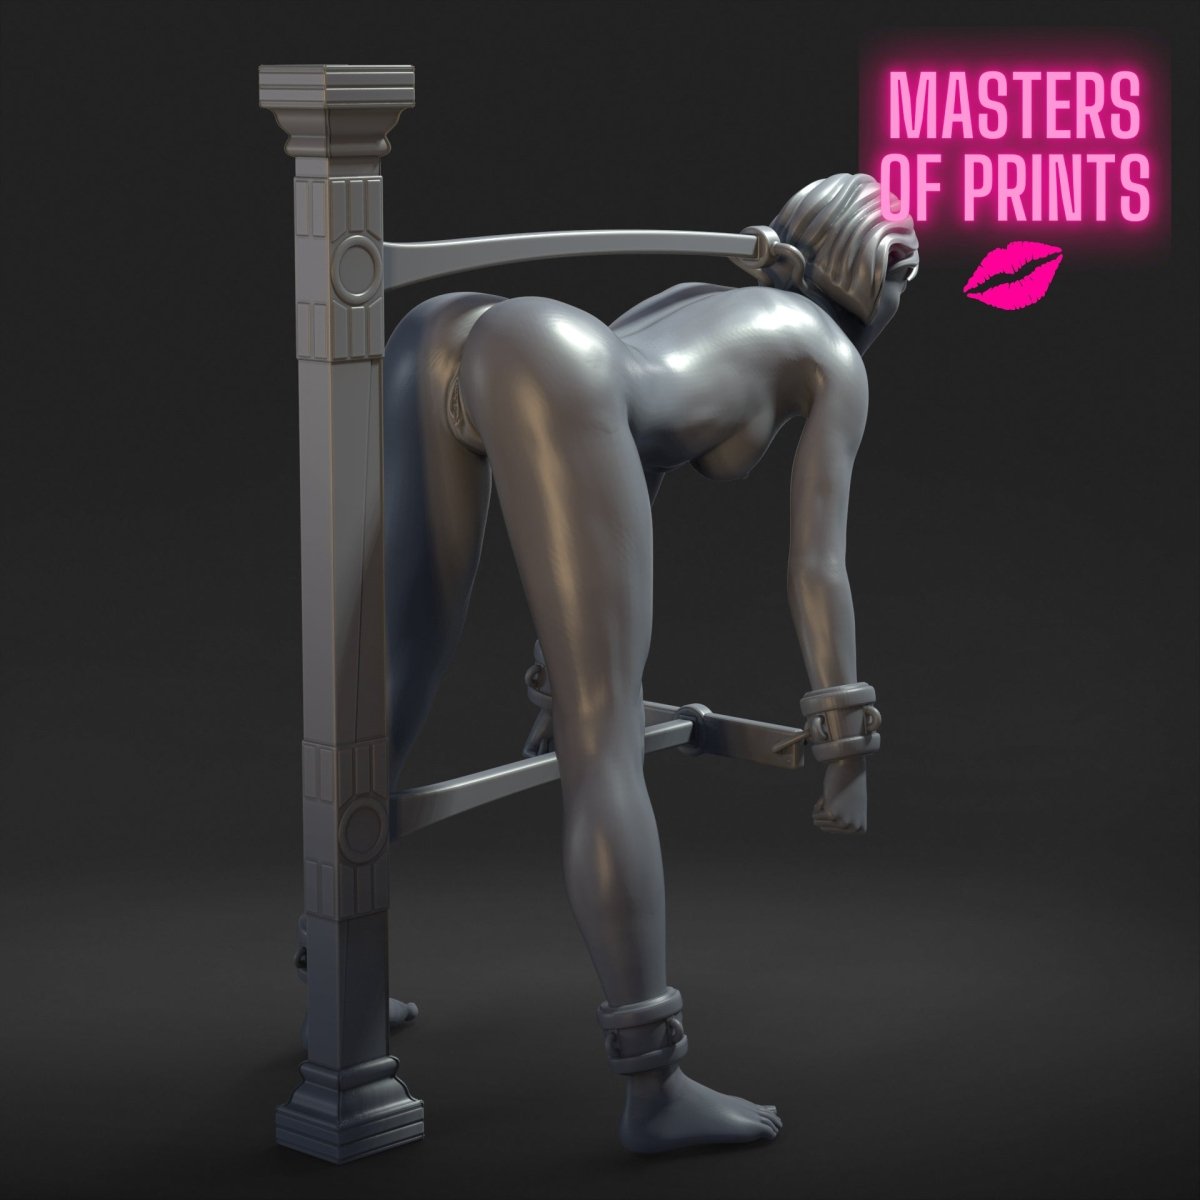 Single Restraint Post 1 Mature 3d Printed miniature FanArt by Masters Of Prints Collectables Statues & Figurines